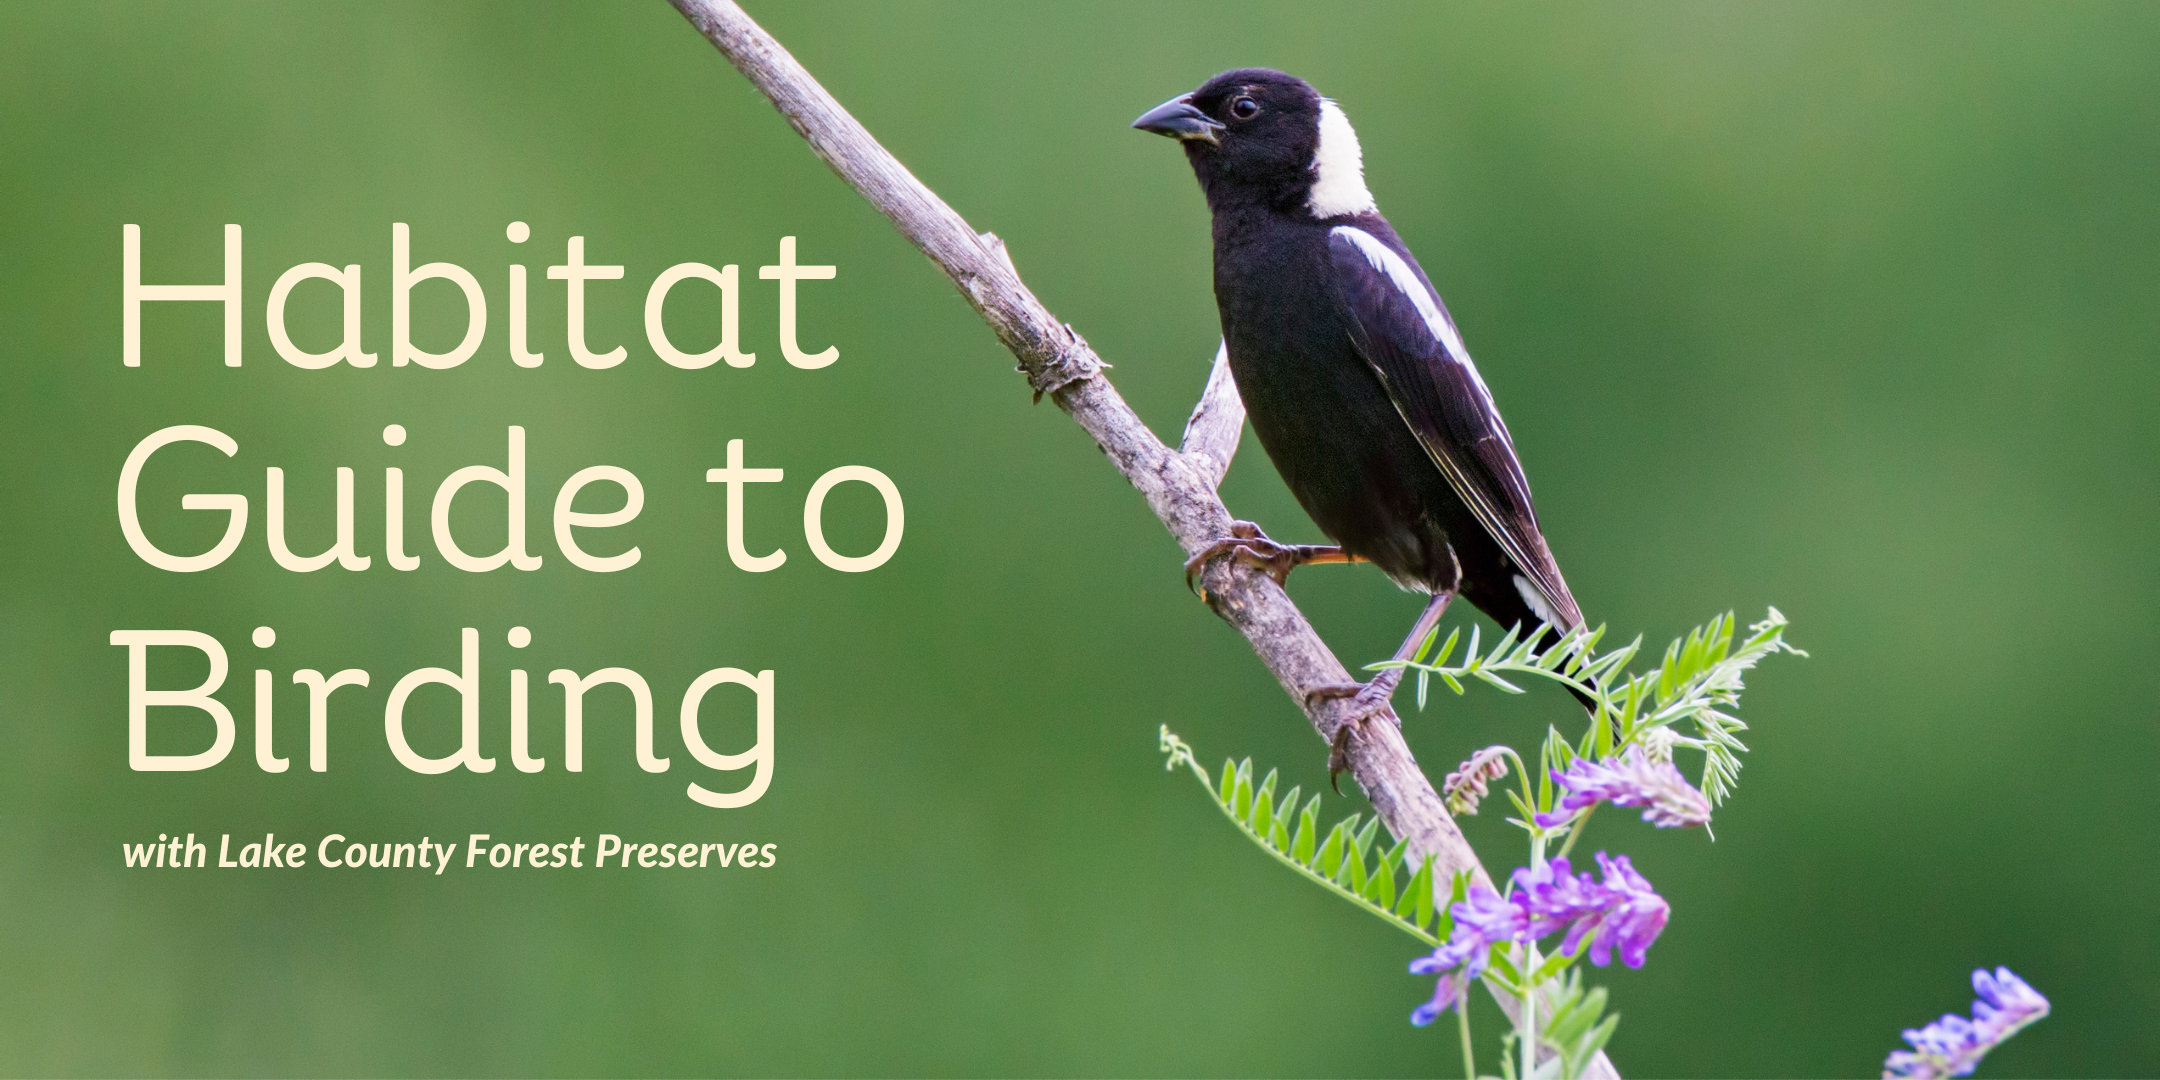 image of text stating Habitat Guide to Birding with Lake County Forest Preserves in pale yellow over an image of a bobolink on a branch with green leaves and purple flowers and a faded green background.